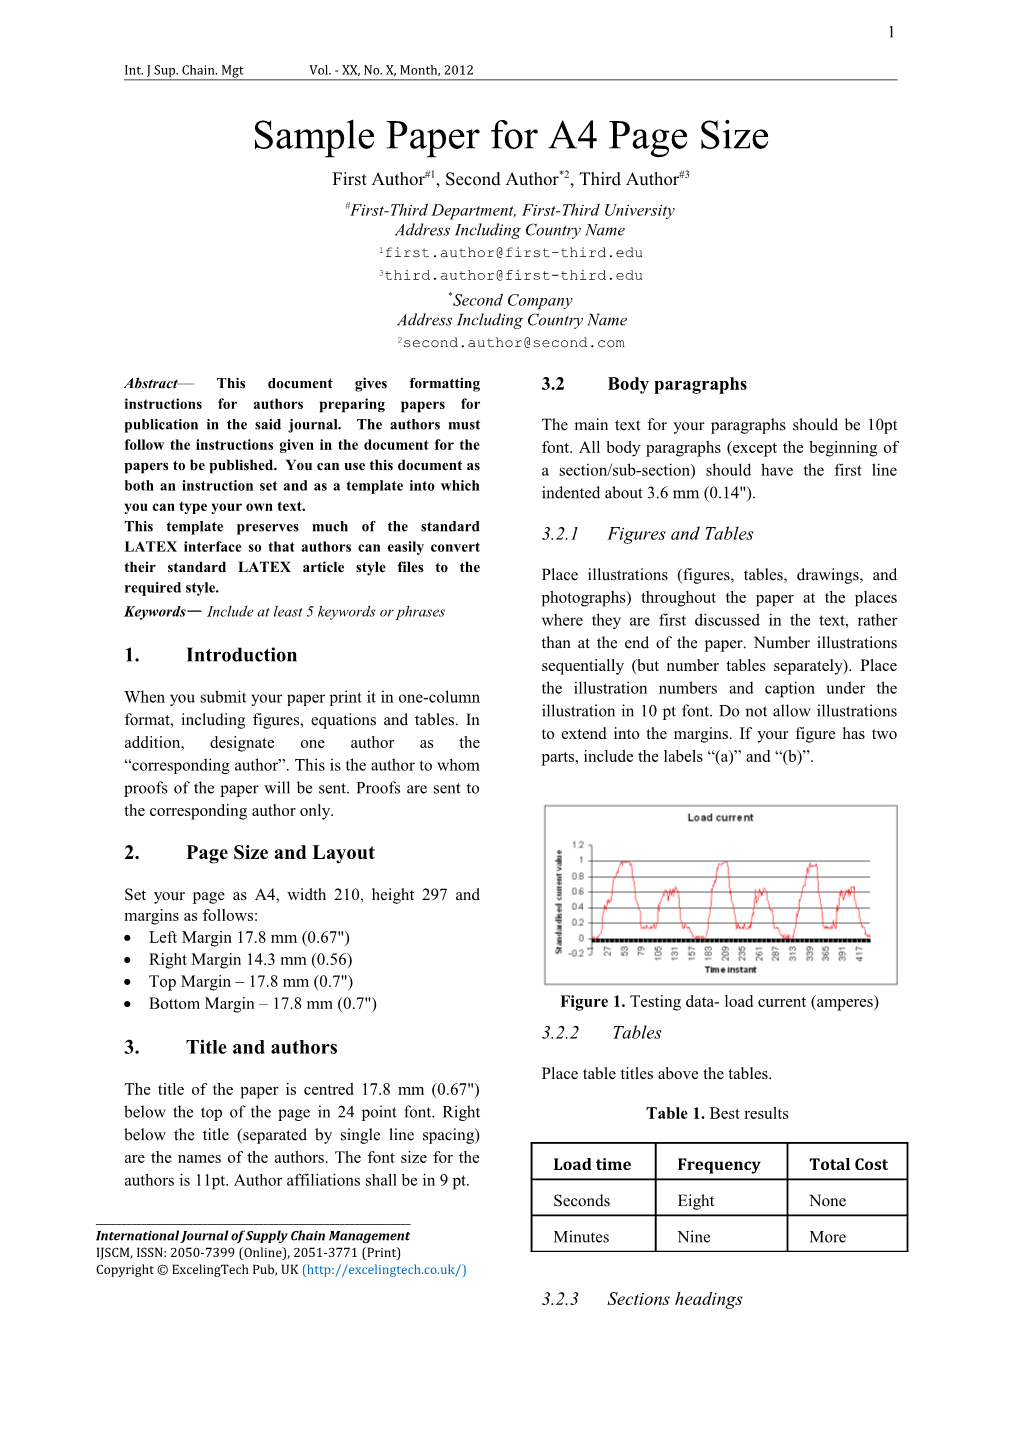 Sample Paper for A4 Page Size